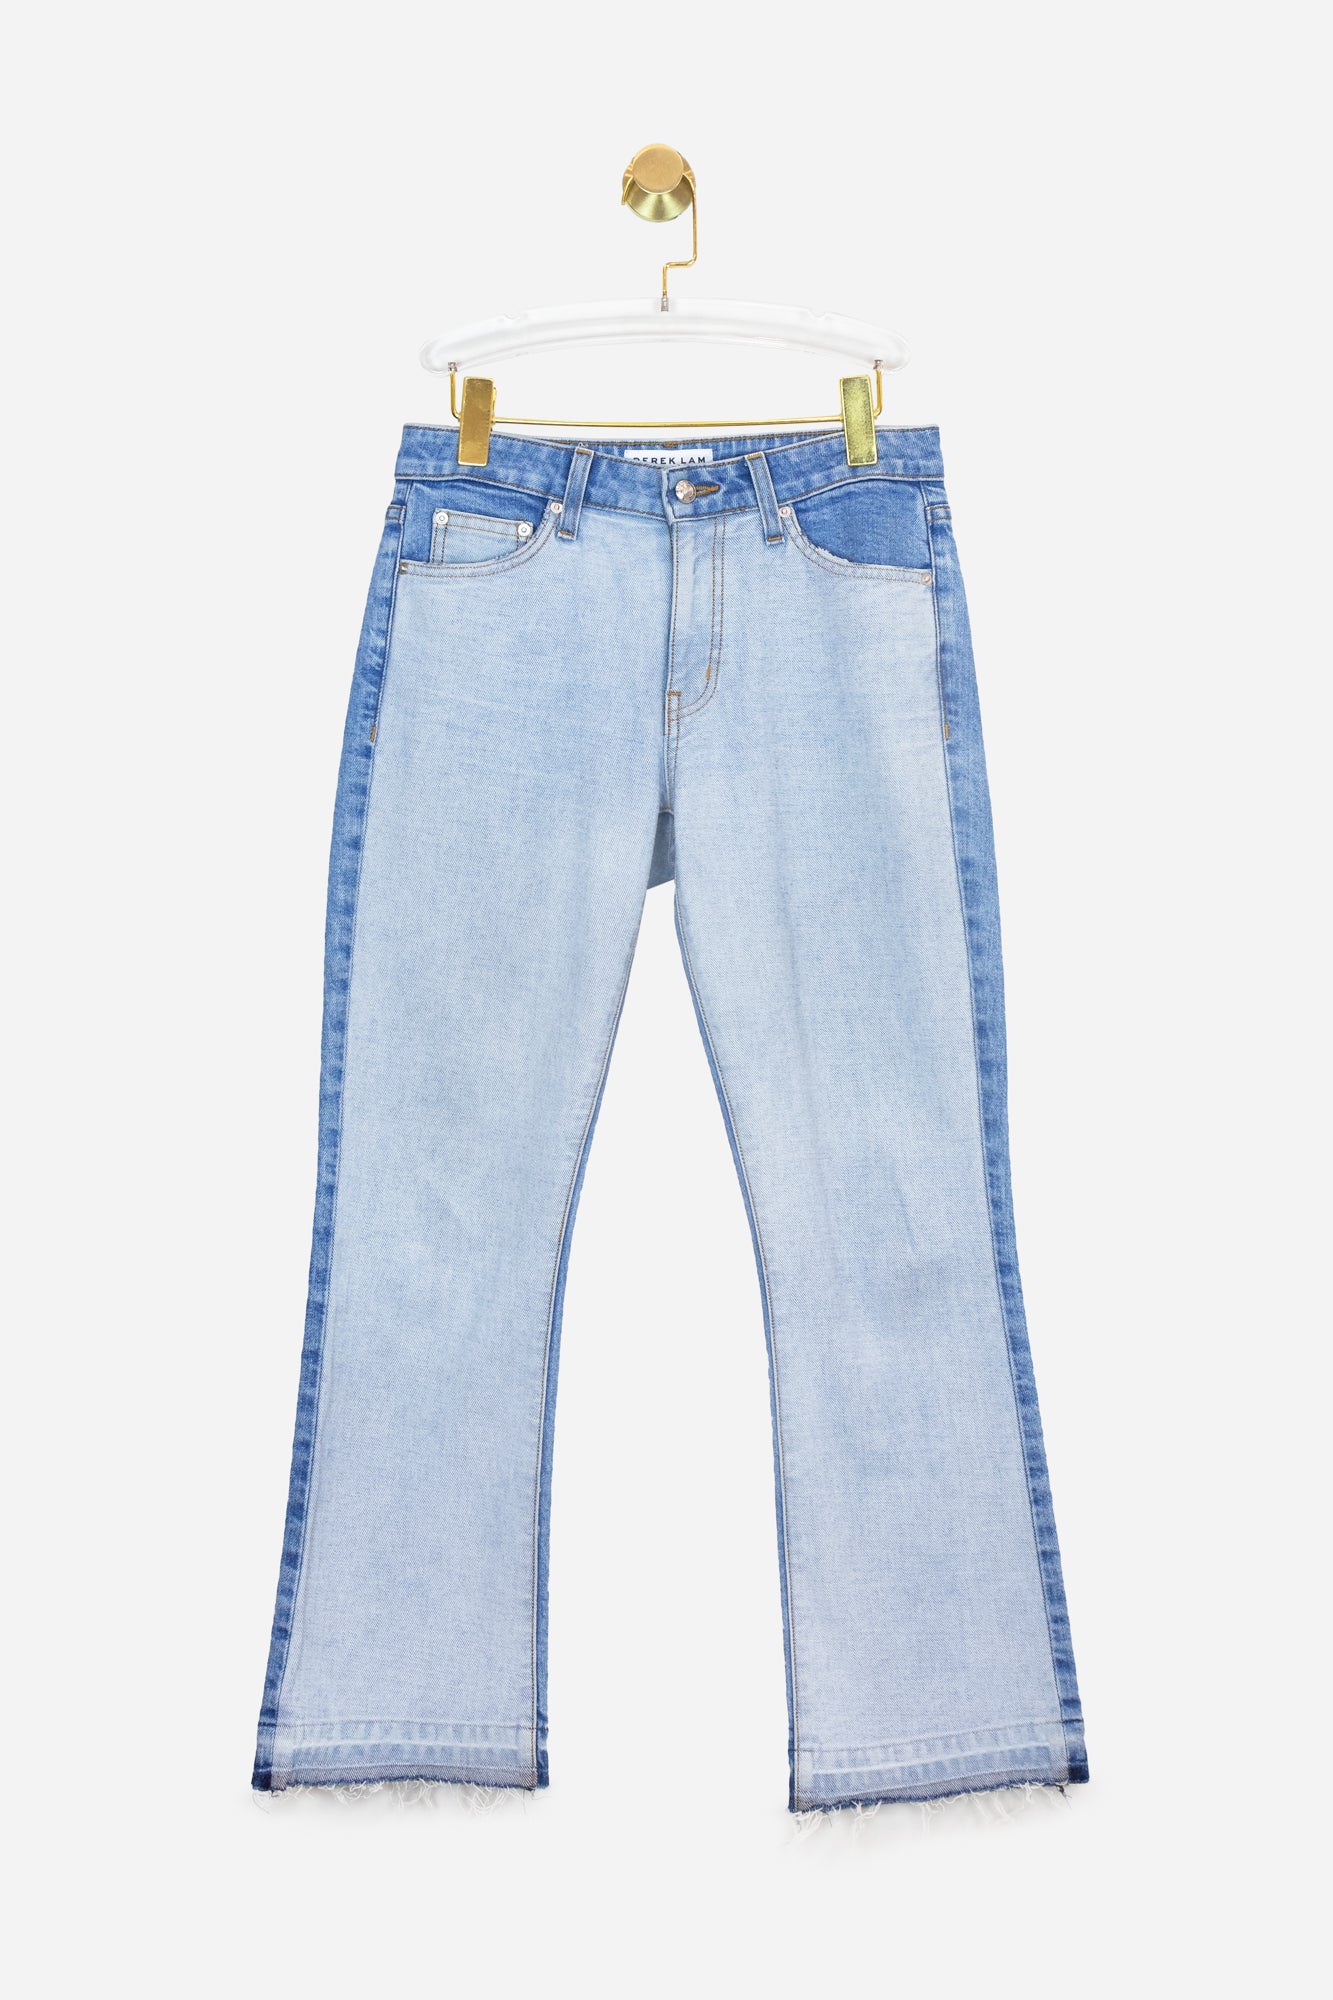 Two-Tone Denim with Distressed Bottoms